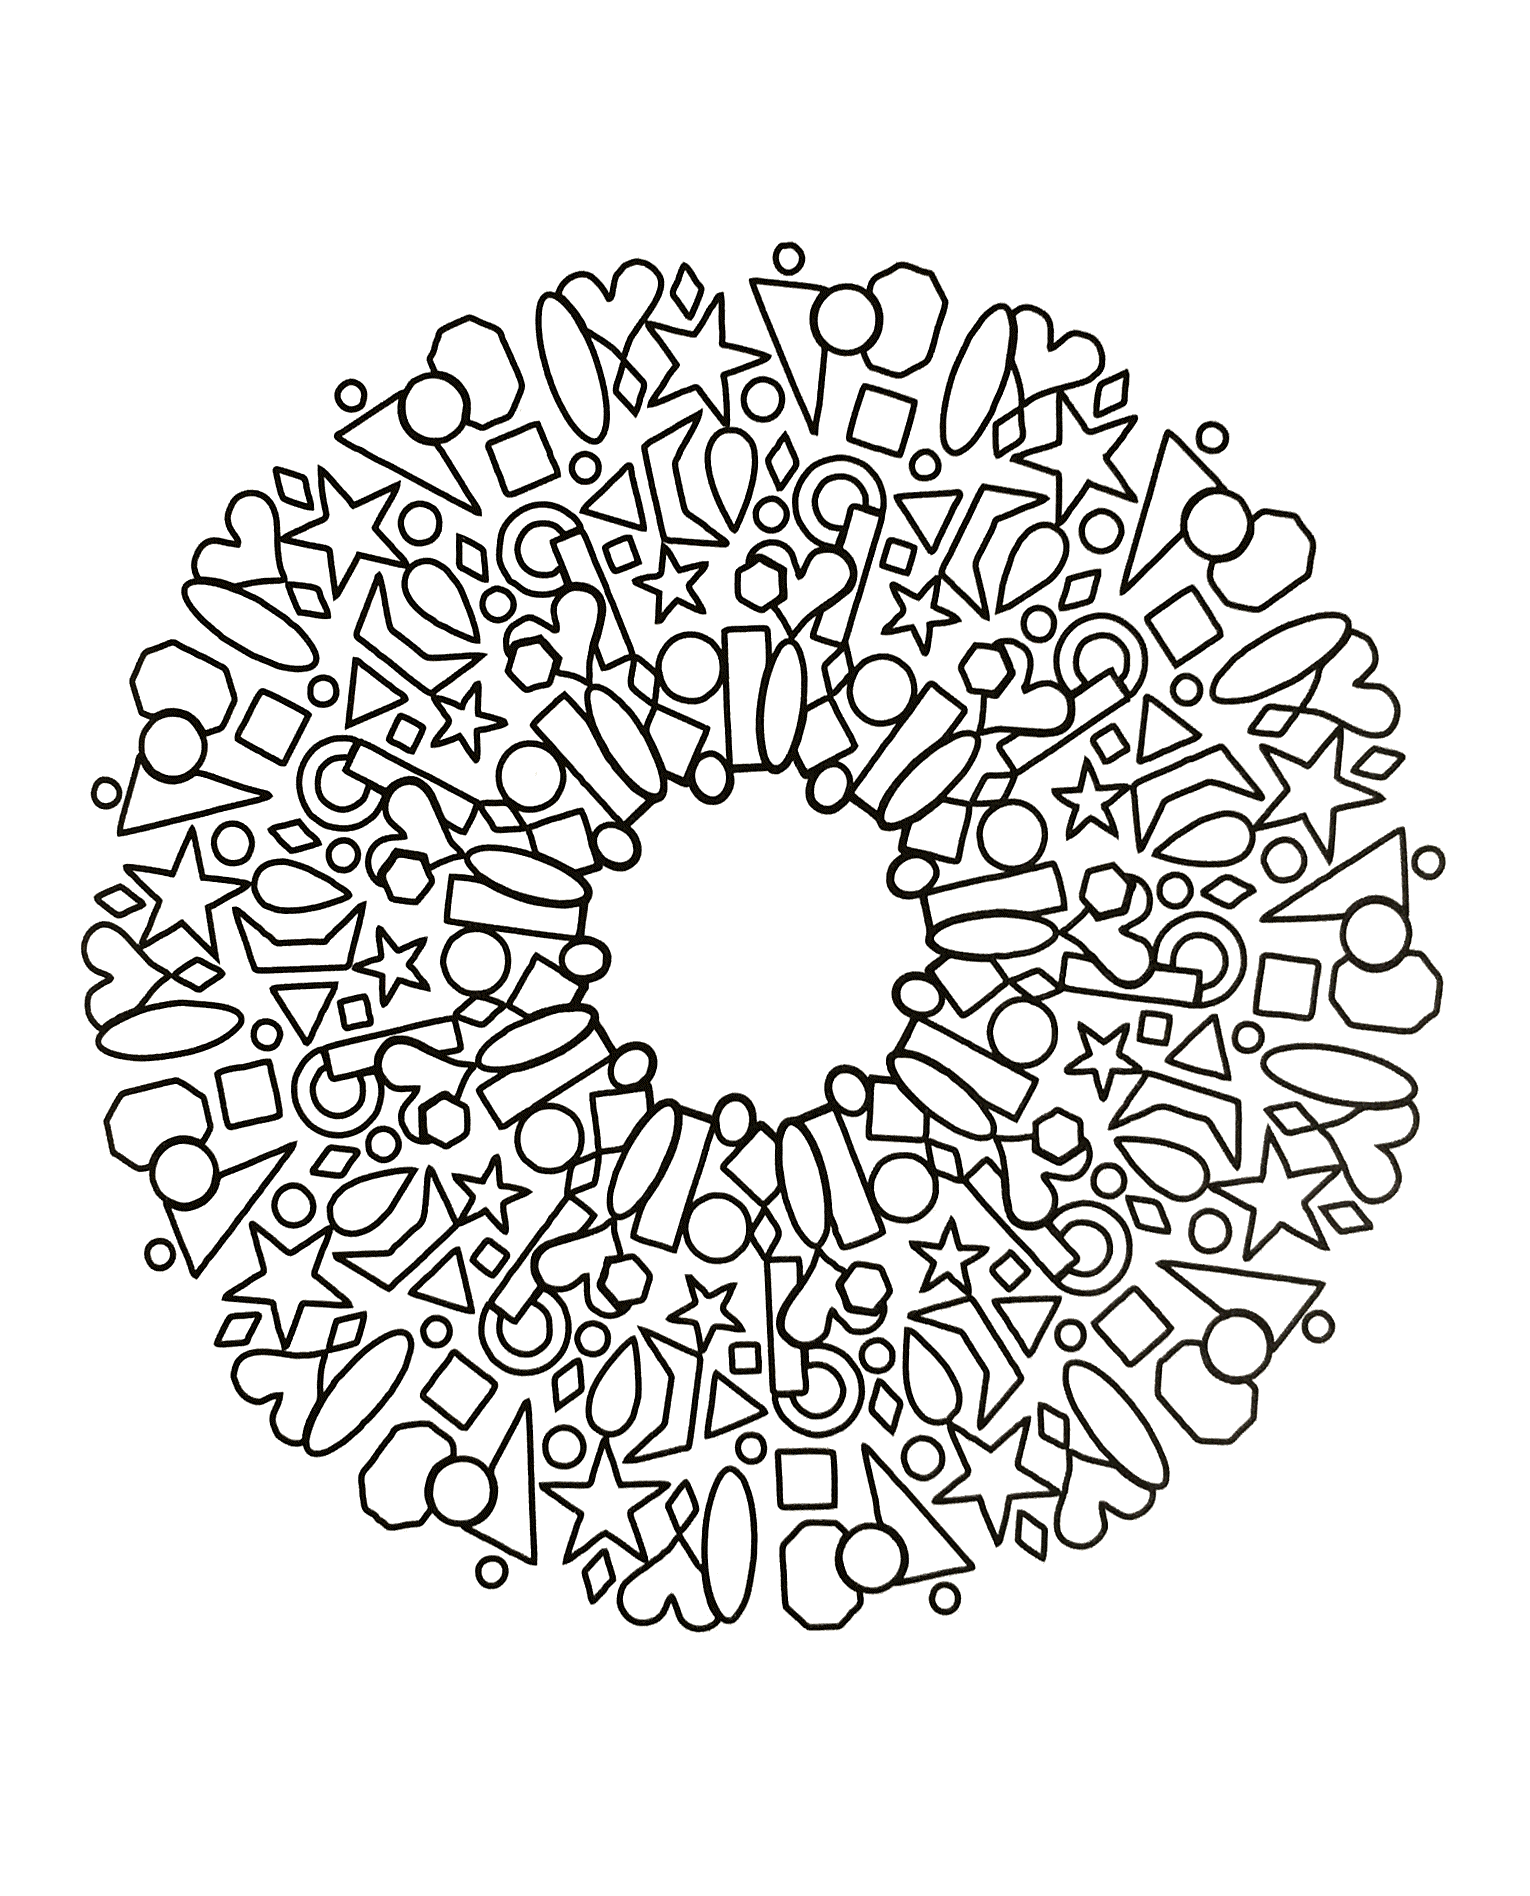 Simple Mandalas coloring page to download for free